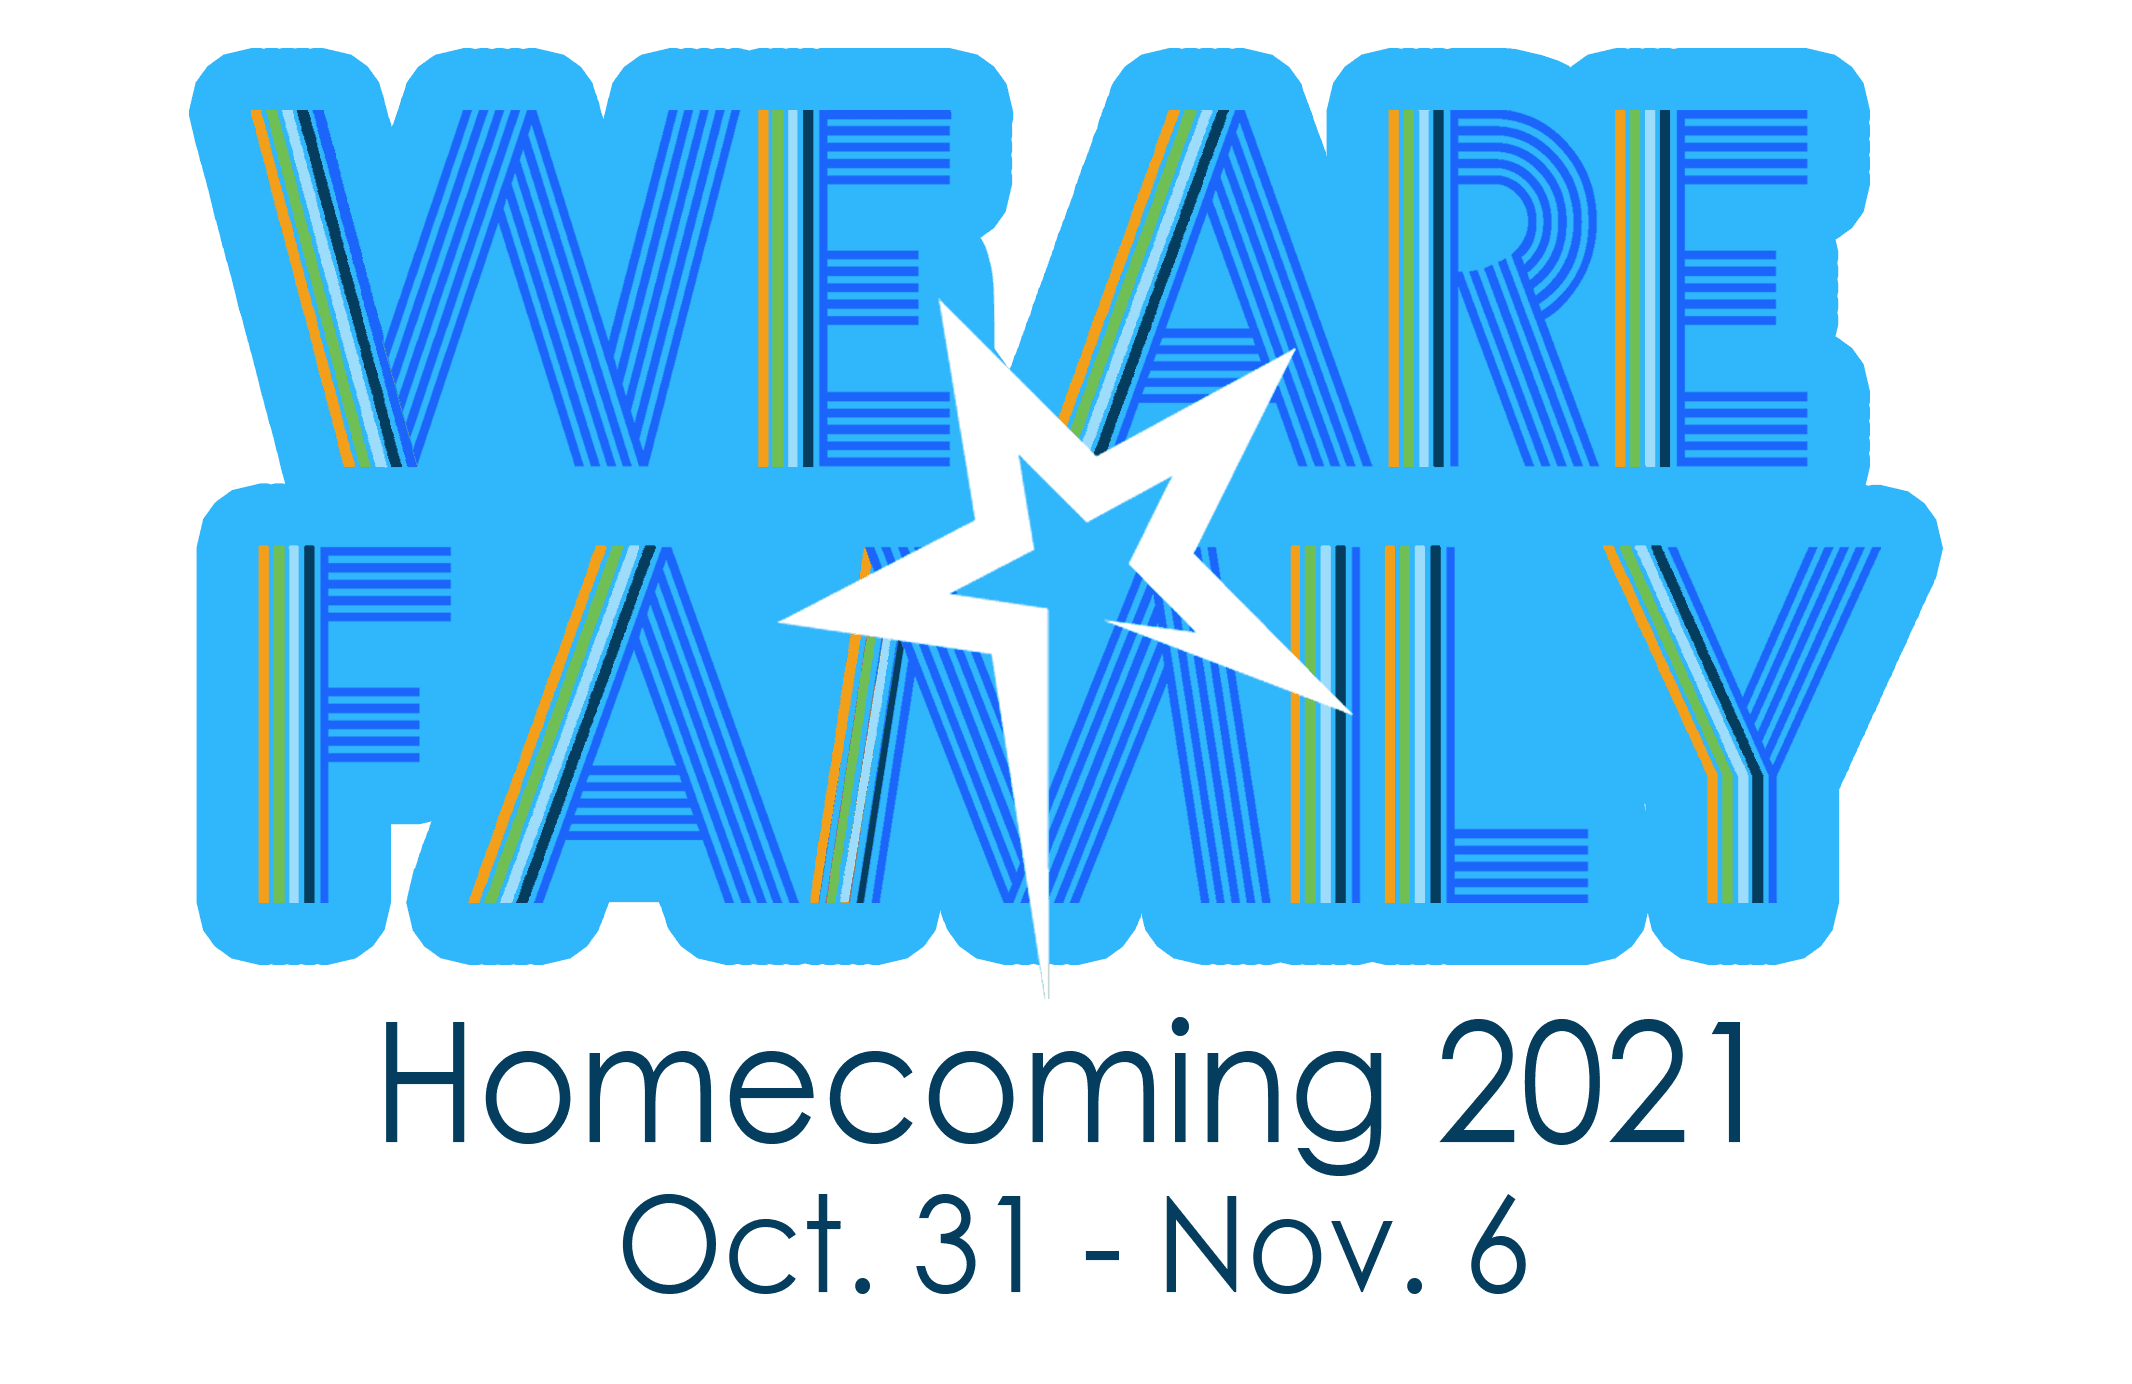 We Are Family - 2021 Homecoming - October 31 through November 6